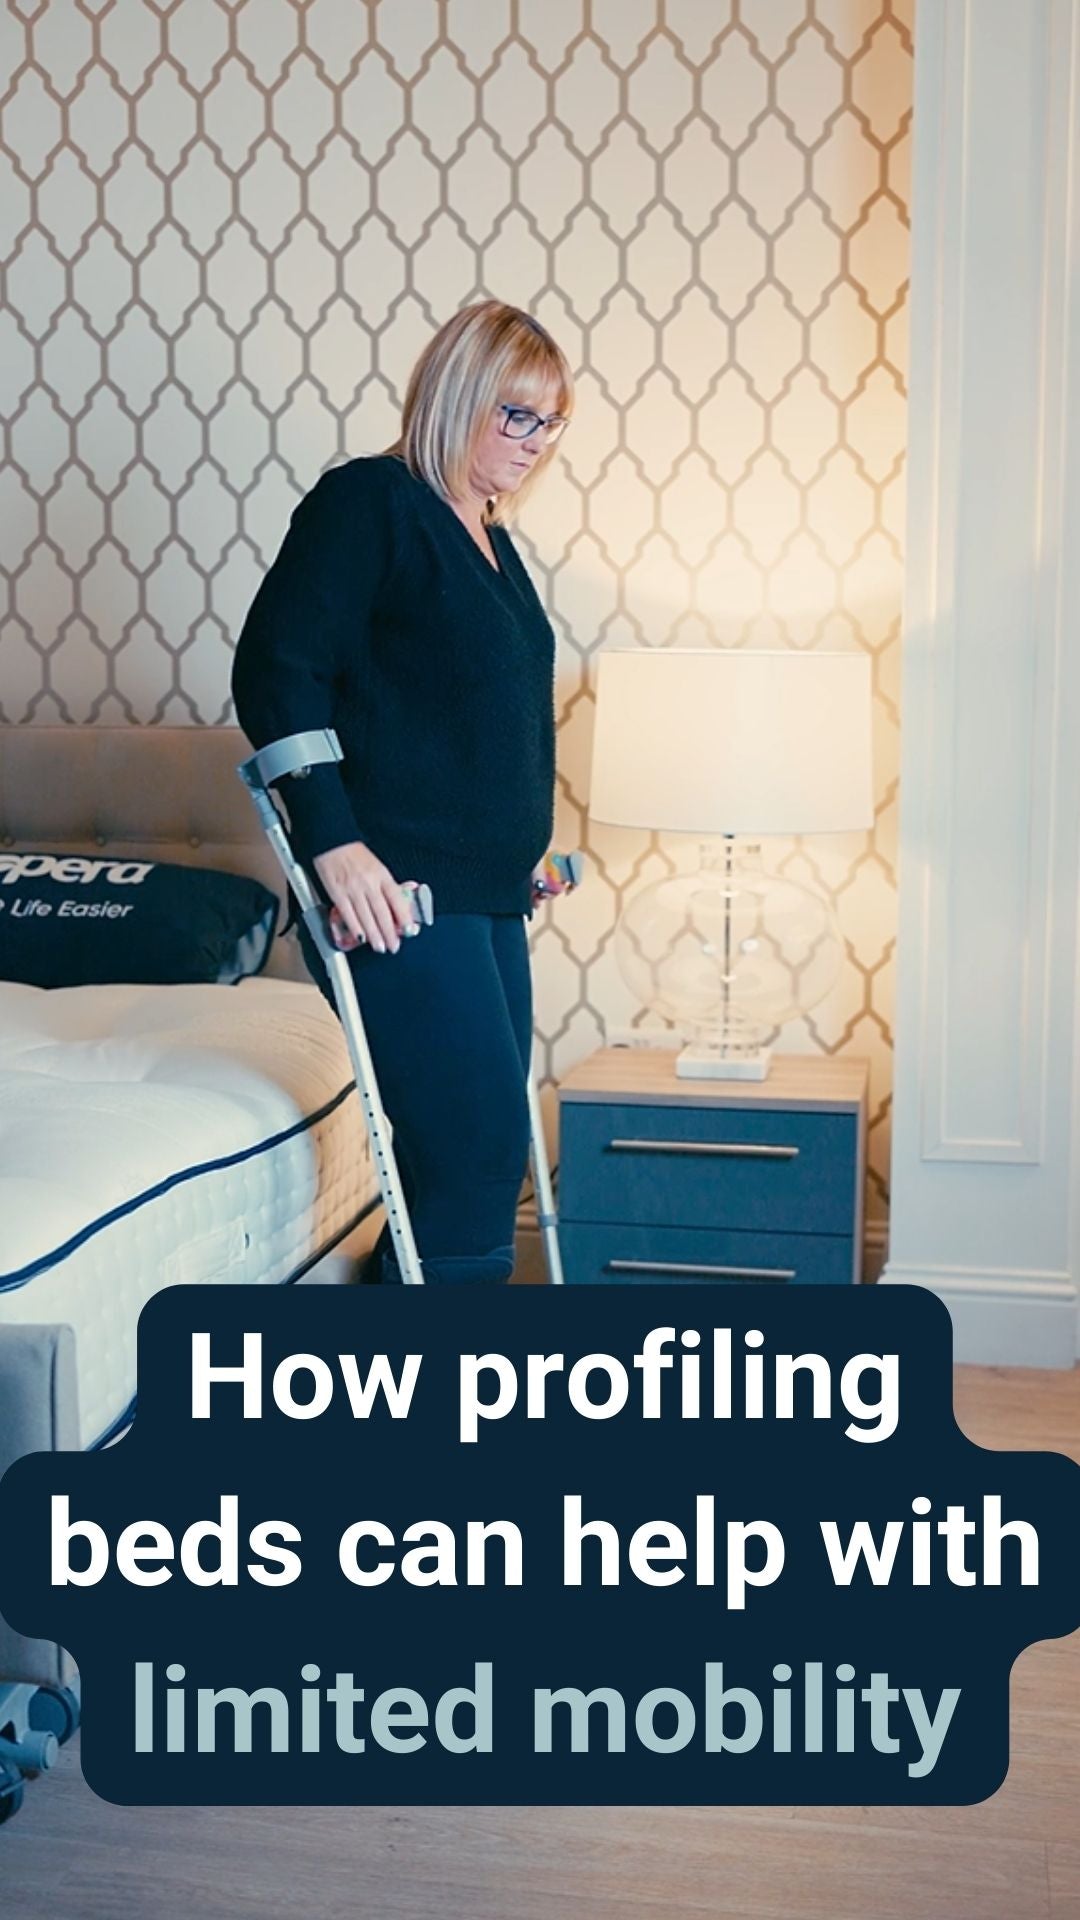 A lady stood next to a profiling bed on crutches with the caption 'How profiling beds can help with limited mobility'